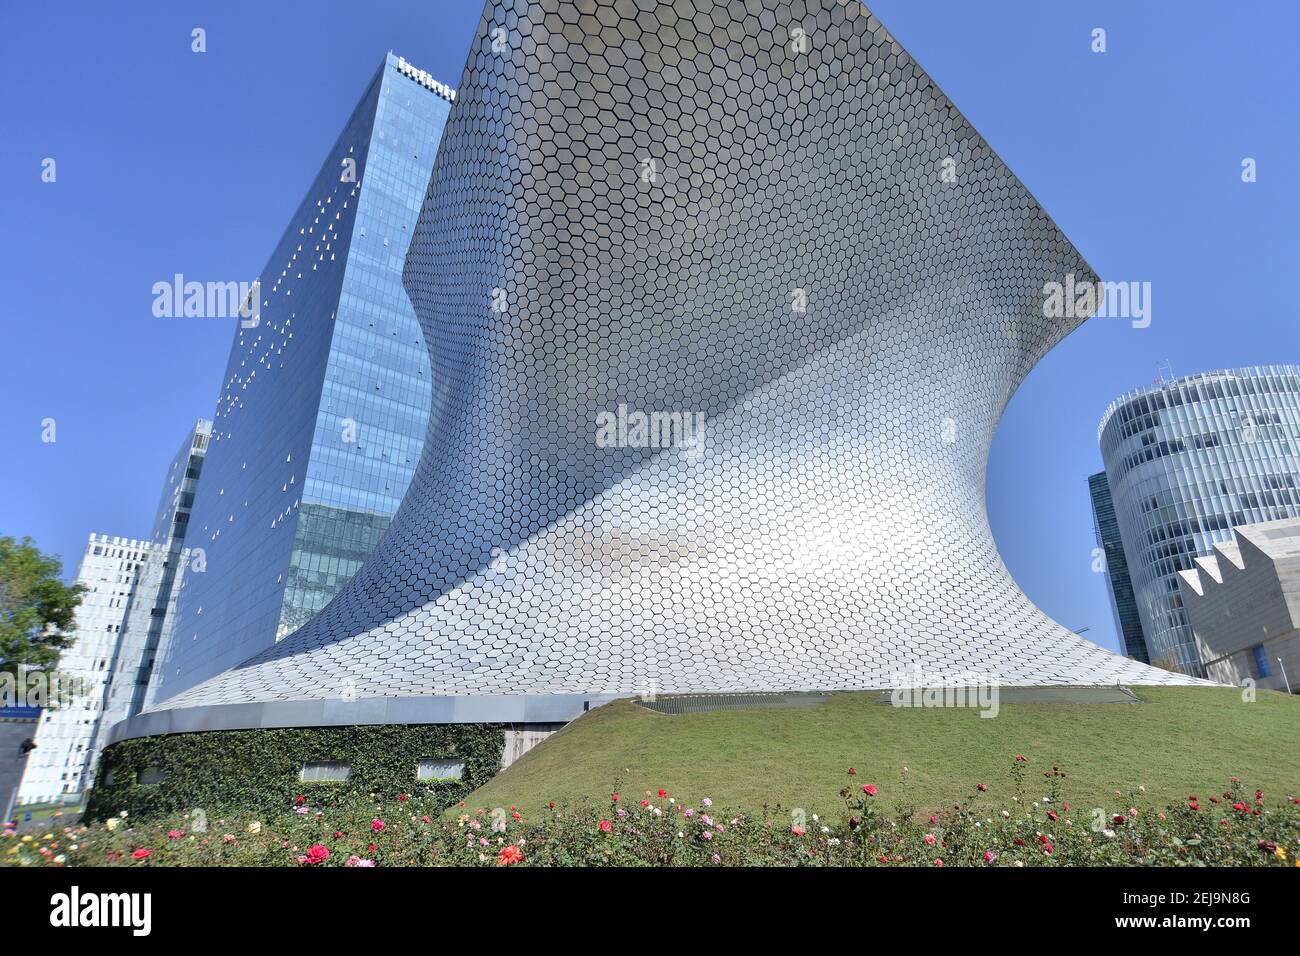 MEXICO CITY, MEXICO - JANUARY 10: General view of the Soumaya Museum building on January 10, 2020 in Mexico City, Mexico. The Soumaya Museum is a cultural institution united in 1994 designed by Mexican architect Fernando Romero. His main task is to share the Carlos Slim Foundation collection, which offers more than 3 centuries of American and European art. The name of the museum honors the memory of Soumaya Domit, wife of the businessman and founder of the museum, Carlos Slim Helu. (Photo by Eyepix/Sipa USA) Stock Photo